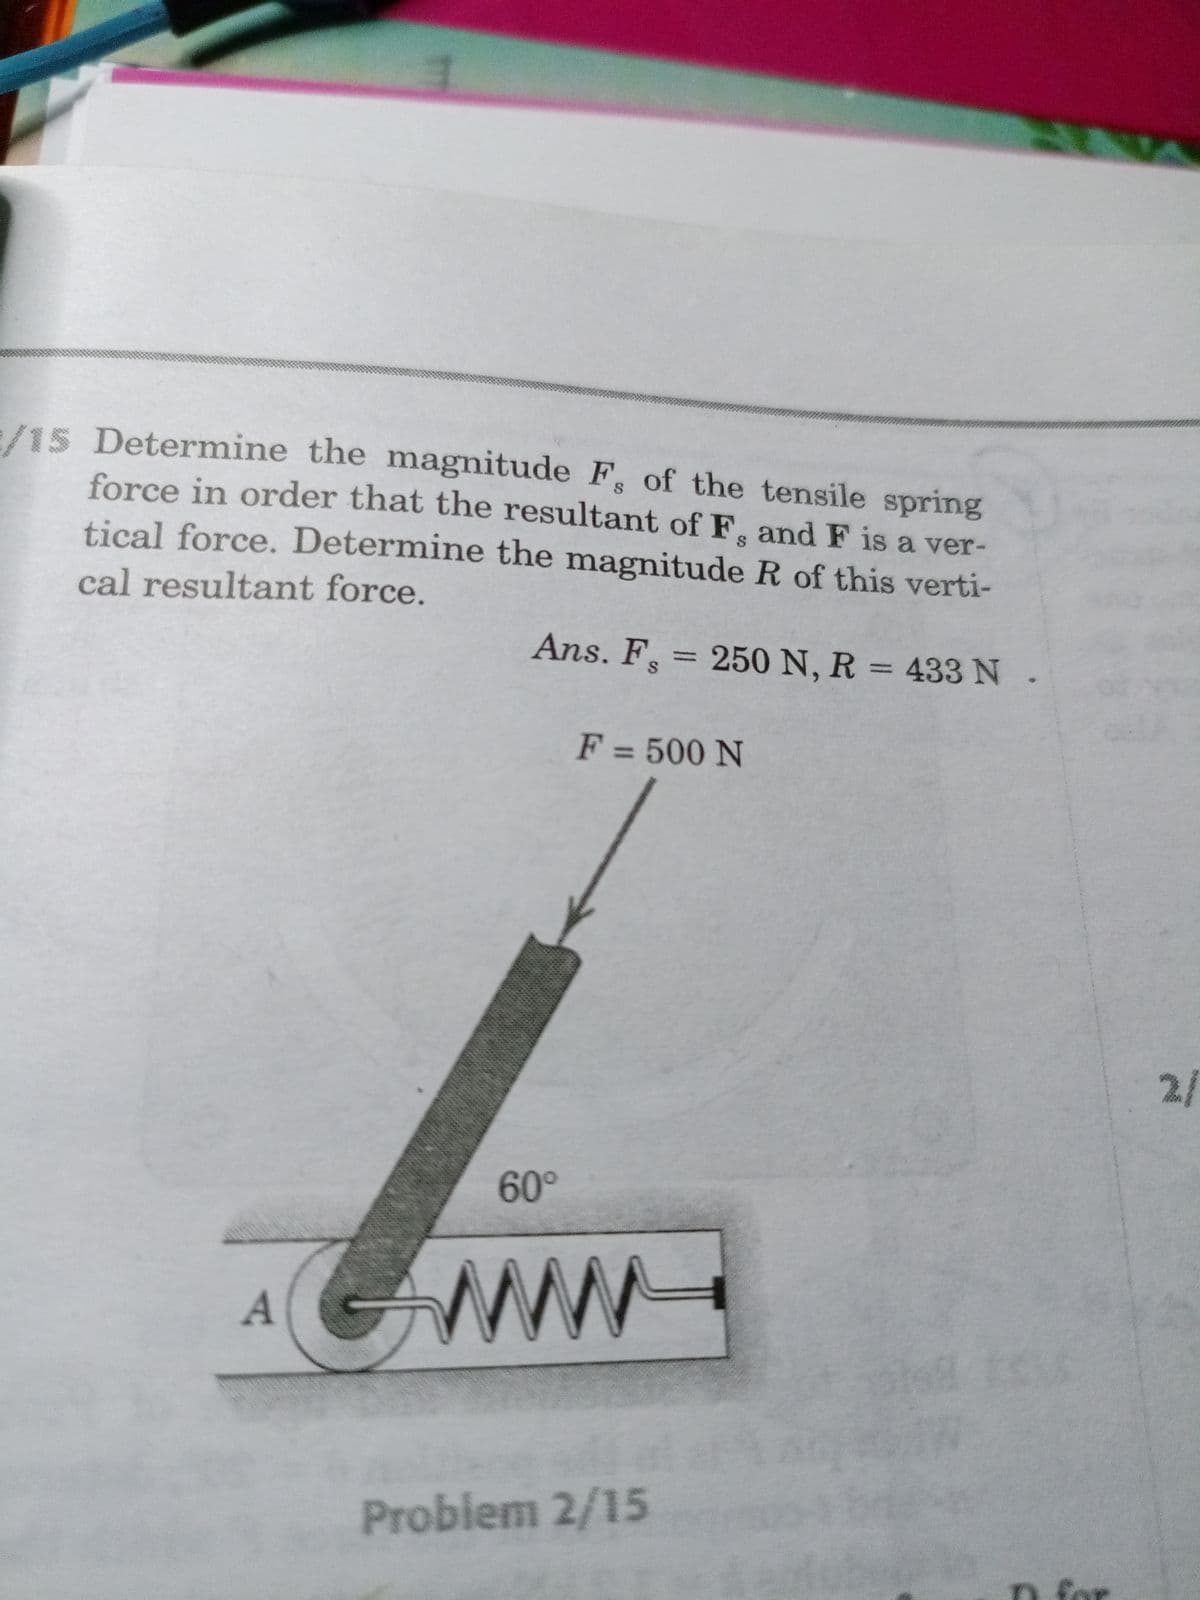 /15 Determine the magnitude F of the tensile spring
force in order that the resultant of F, and F is a ver-
tical force. Determine the magnitude R of this verti-
cal resultant force.
Ans. F = 250 N, R = 433N.
%3D
%3D
F = 500 N
%3D
2/
60°
ww
Problem 2/15
n. for
నా
